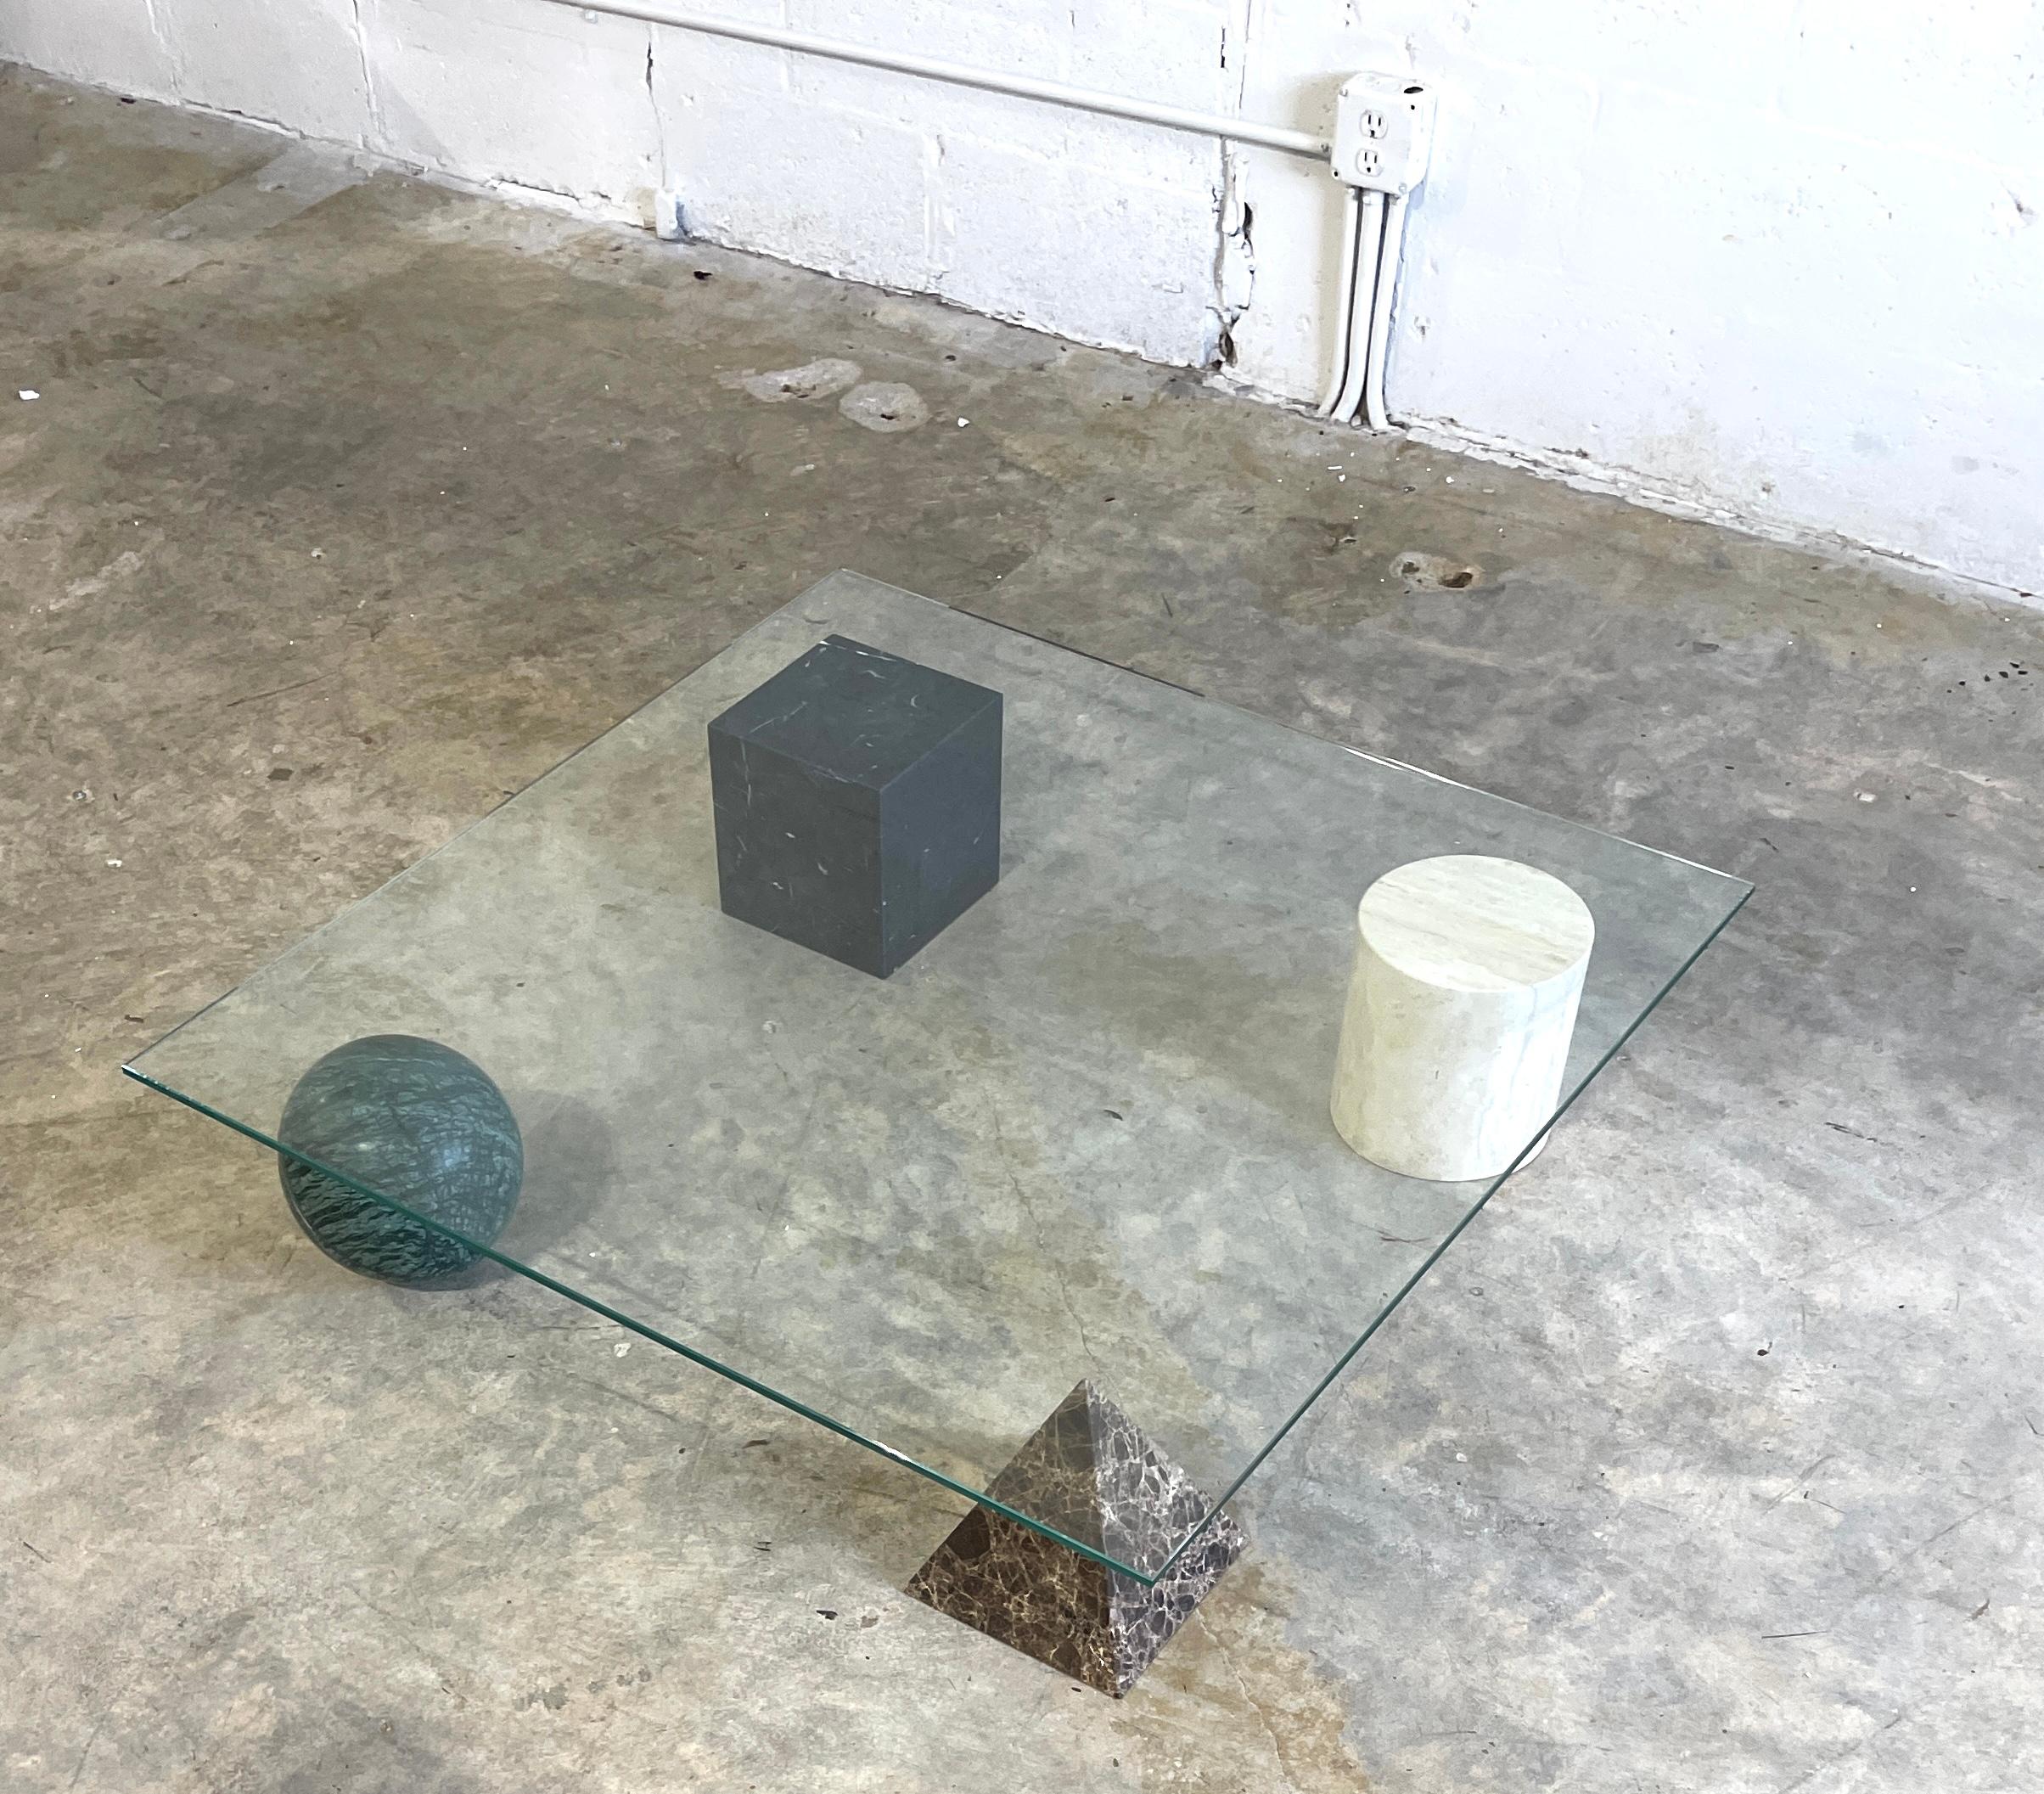 Metafora coffee table By Lella and Massimo Vignelli, made in Italy. Marble and travertine shapes: Cube, pyramid, sphere and cylinder. New glass.